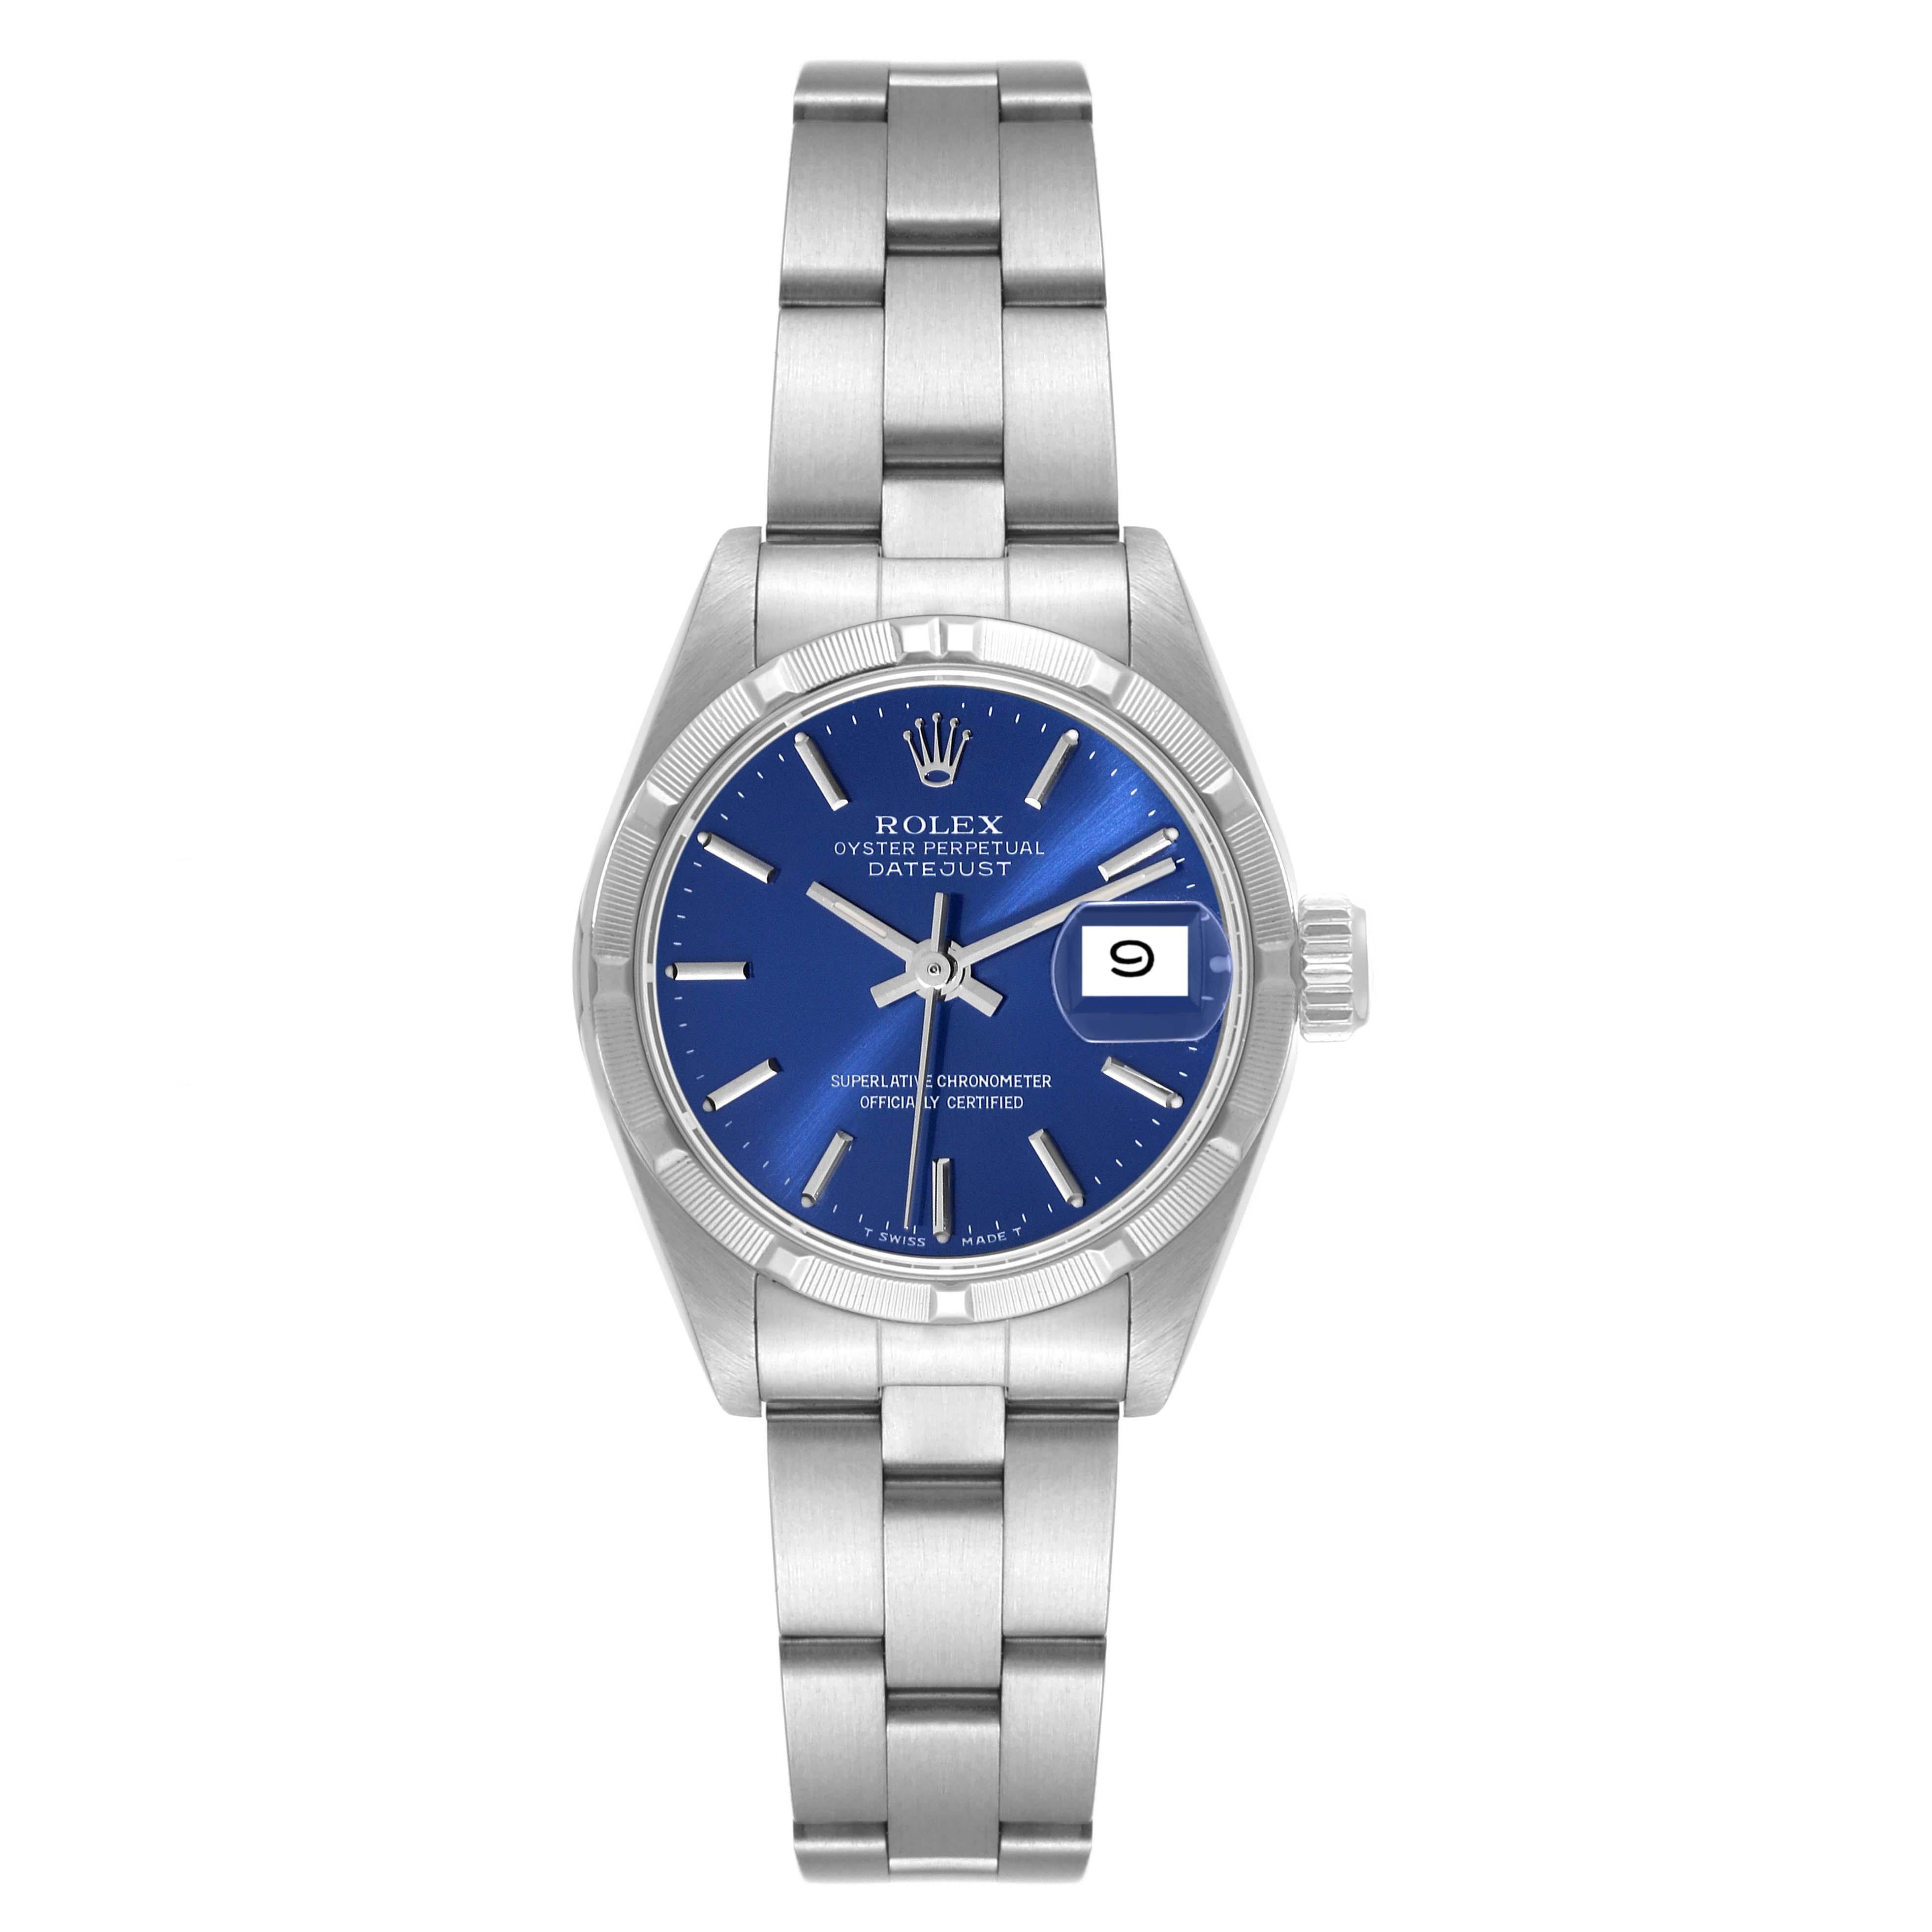 Rolex Datejust Blue Dial Oyster Bracelet Steel Ladies Watch 69190 Box Papers. Officially certified chronometer automatic self-winding movement. Stainless steel oyster case 26.0 mm in diameter. Rolex logo on a crown. Stainless steel engine turned